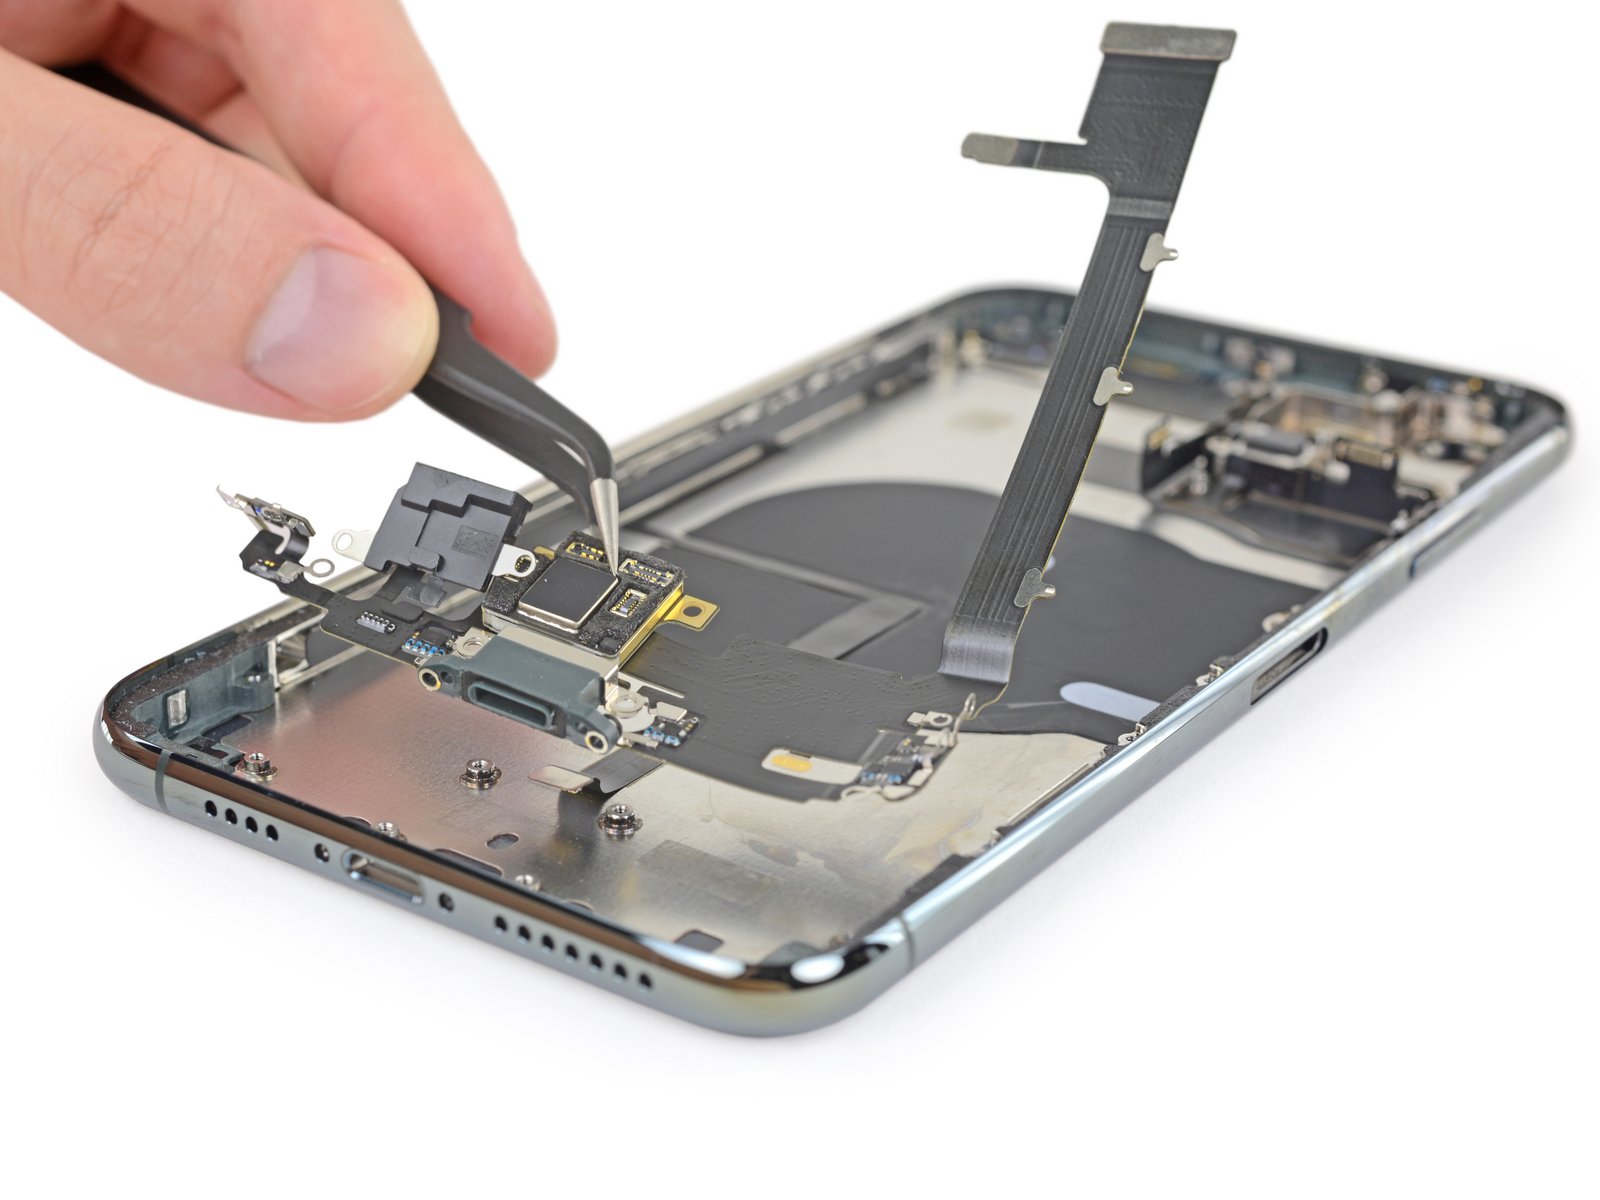 How to Replace iPhone 11 Screen Digitizer: 7 Steps to Successful iPhone Repair at Home